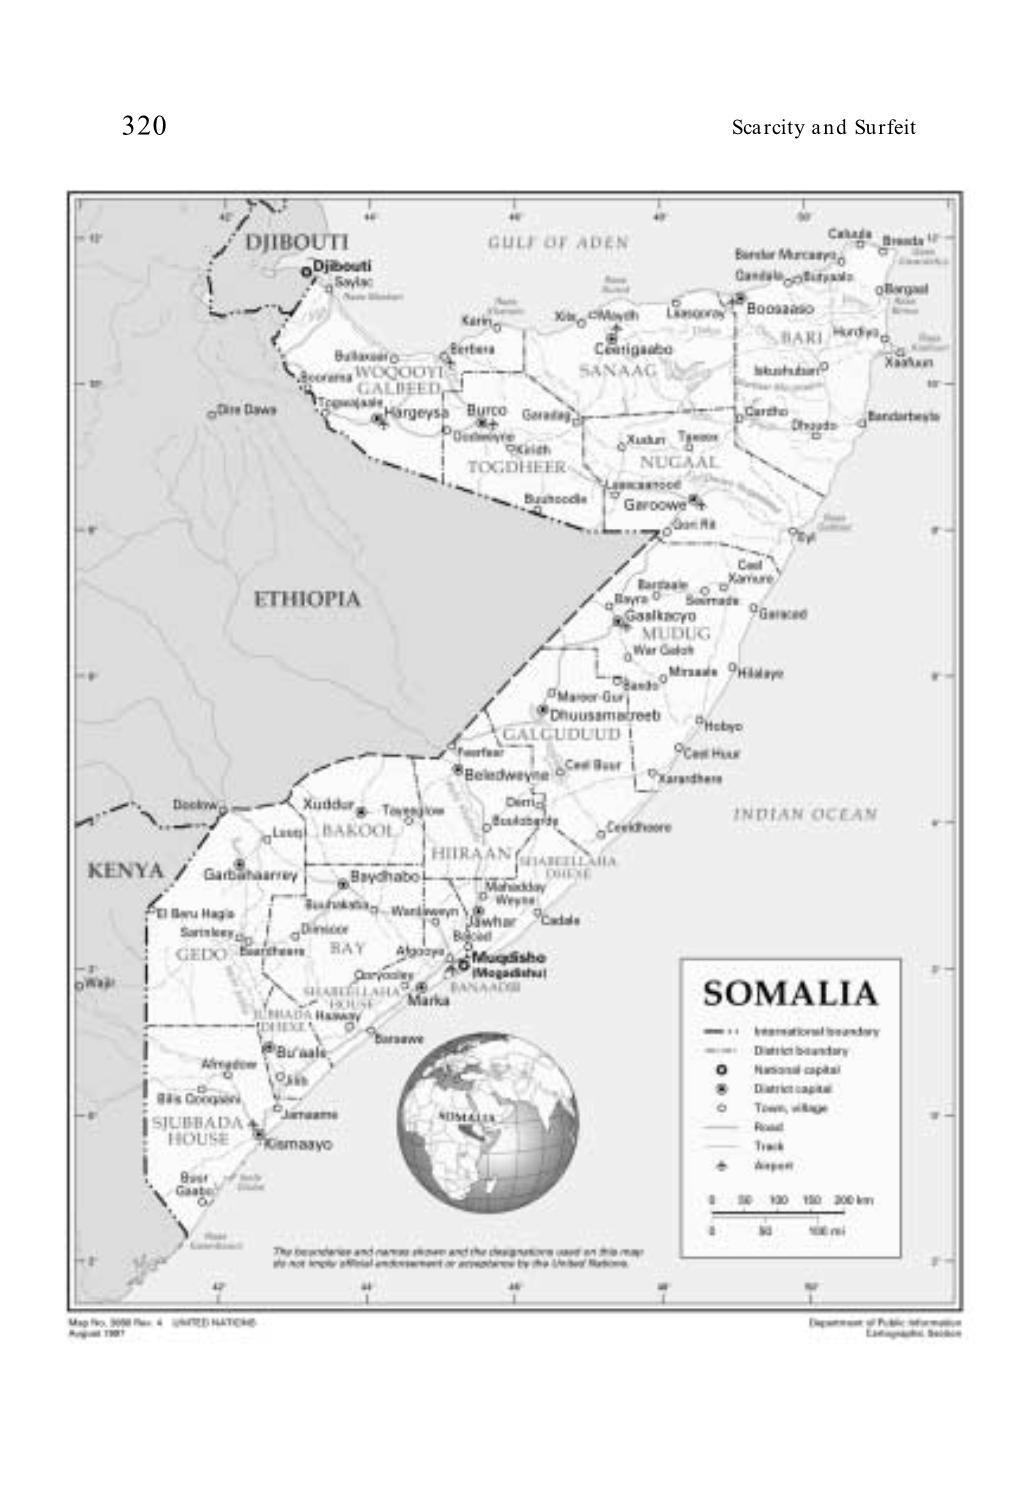 Scarcity and Surfeit Chapter Seven Deegaan, Politics and War in Somalia